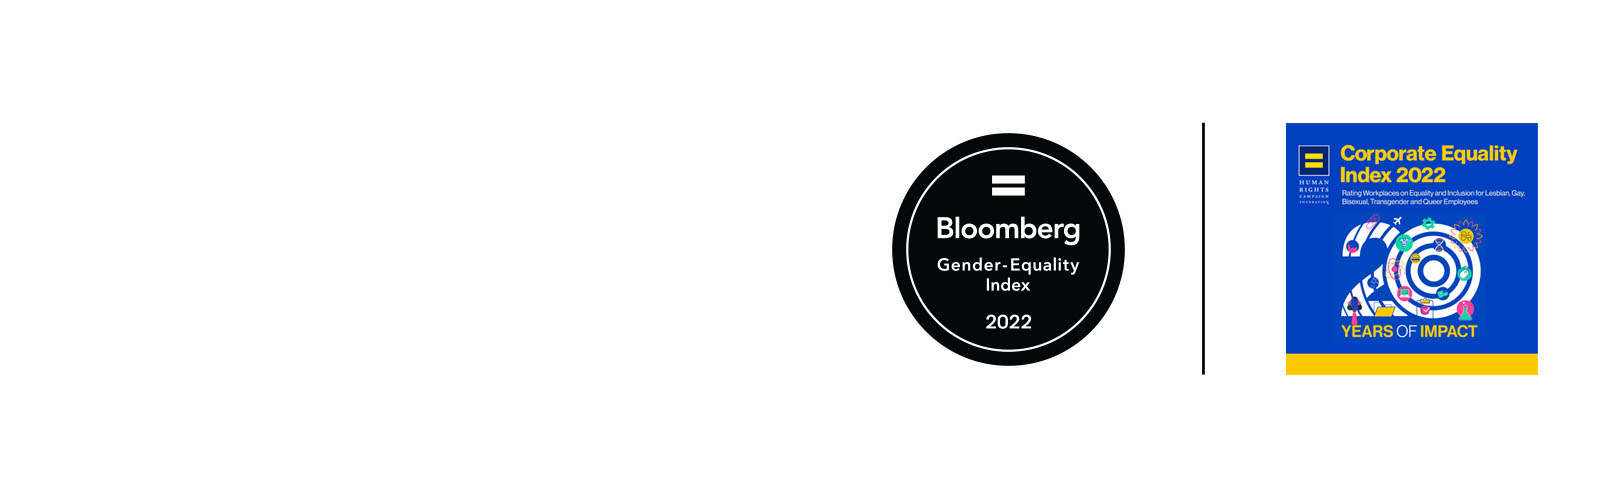 Bloomberg Gender-Equality Index and Corporate Equality Index 2022